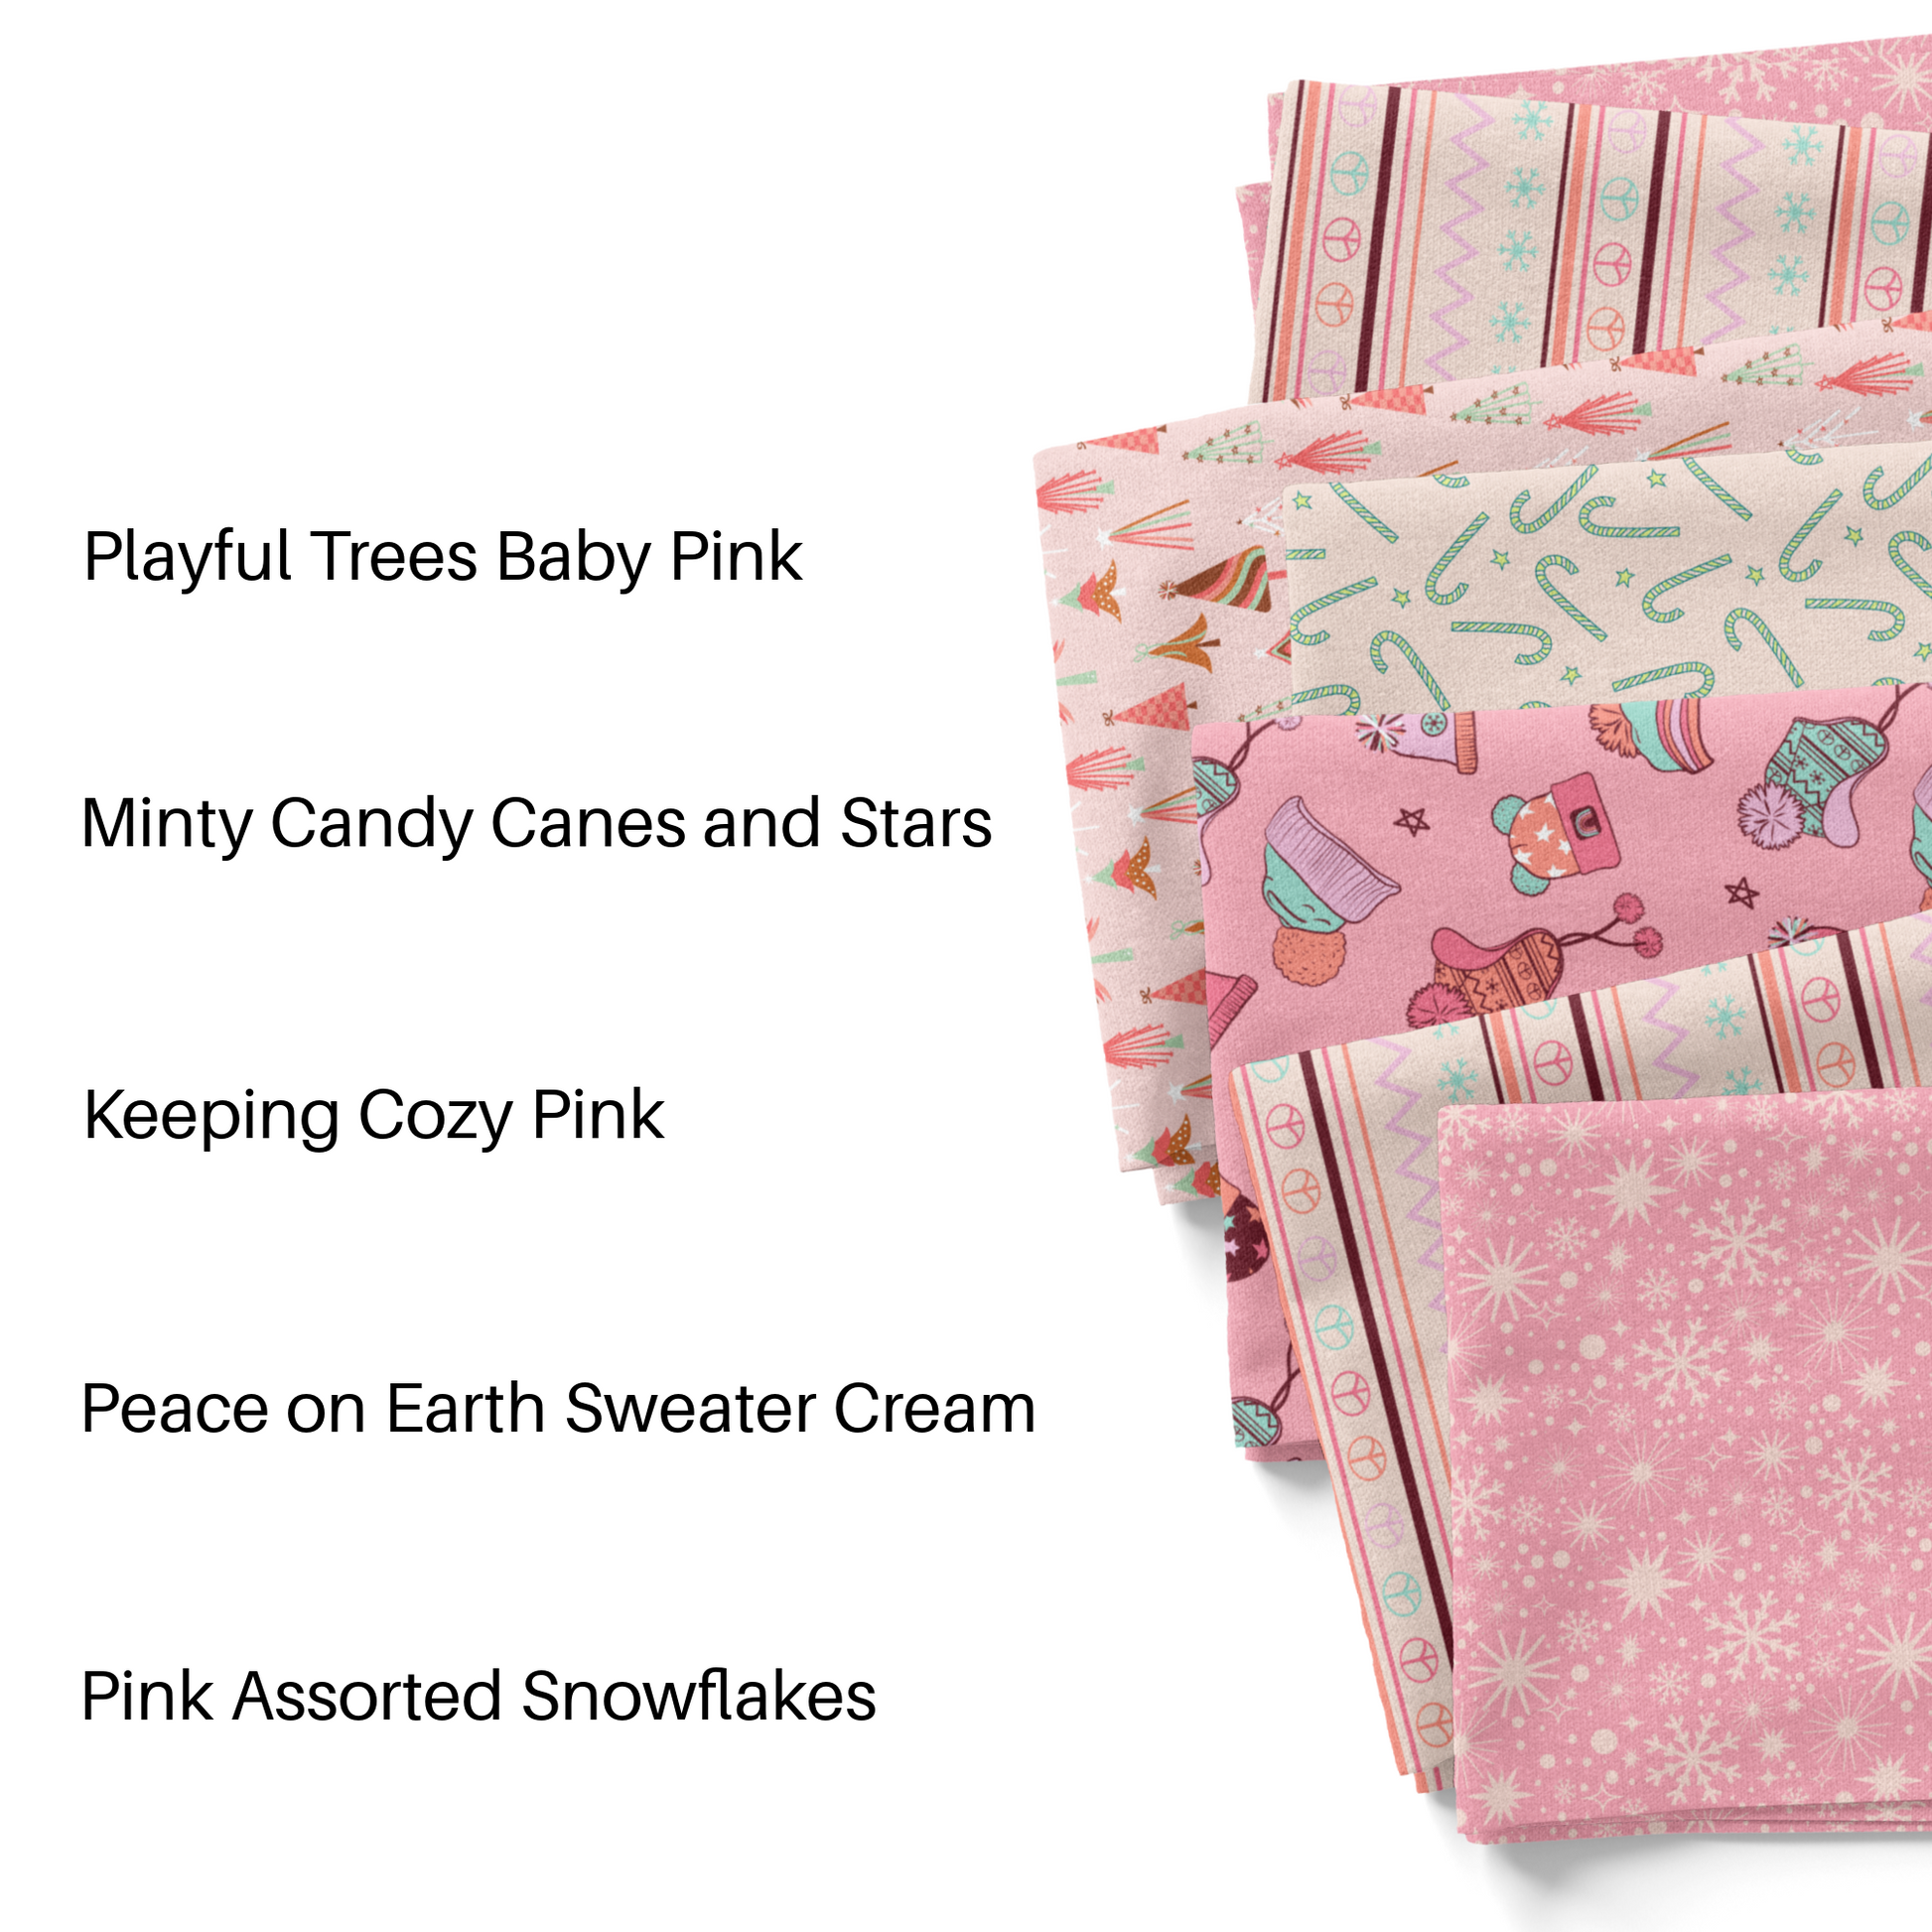 The Peachy Dot pink themed Christmas collection.